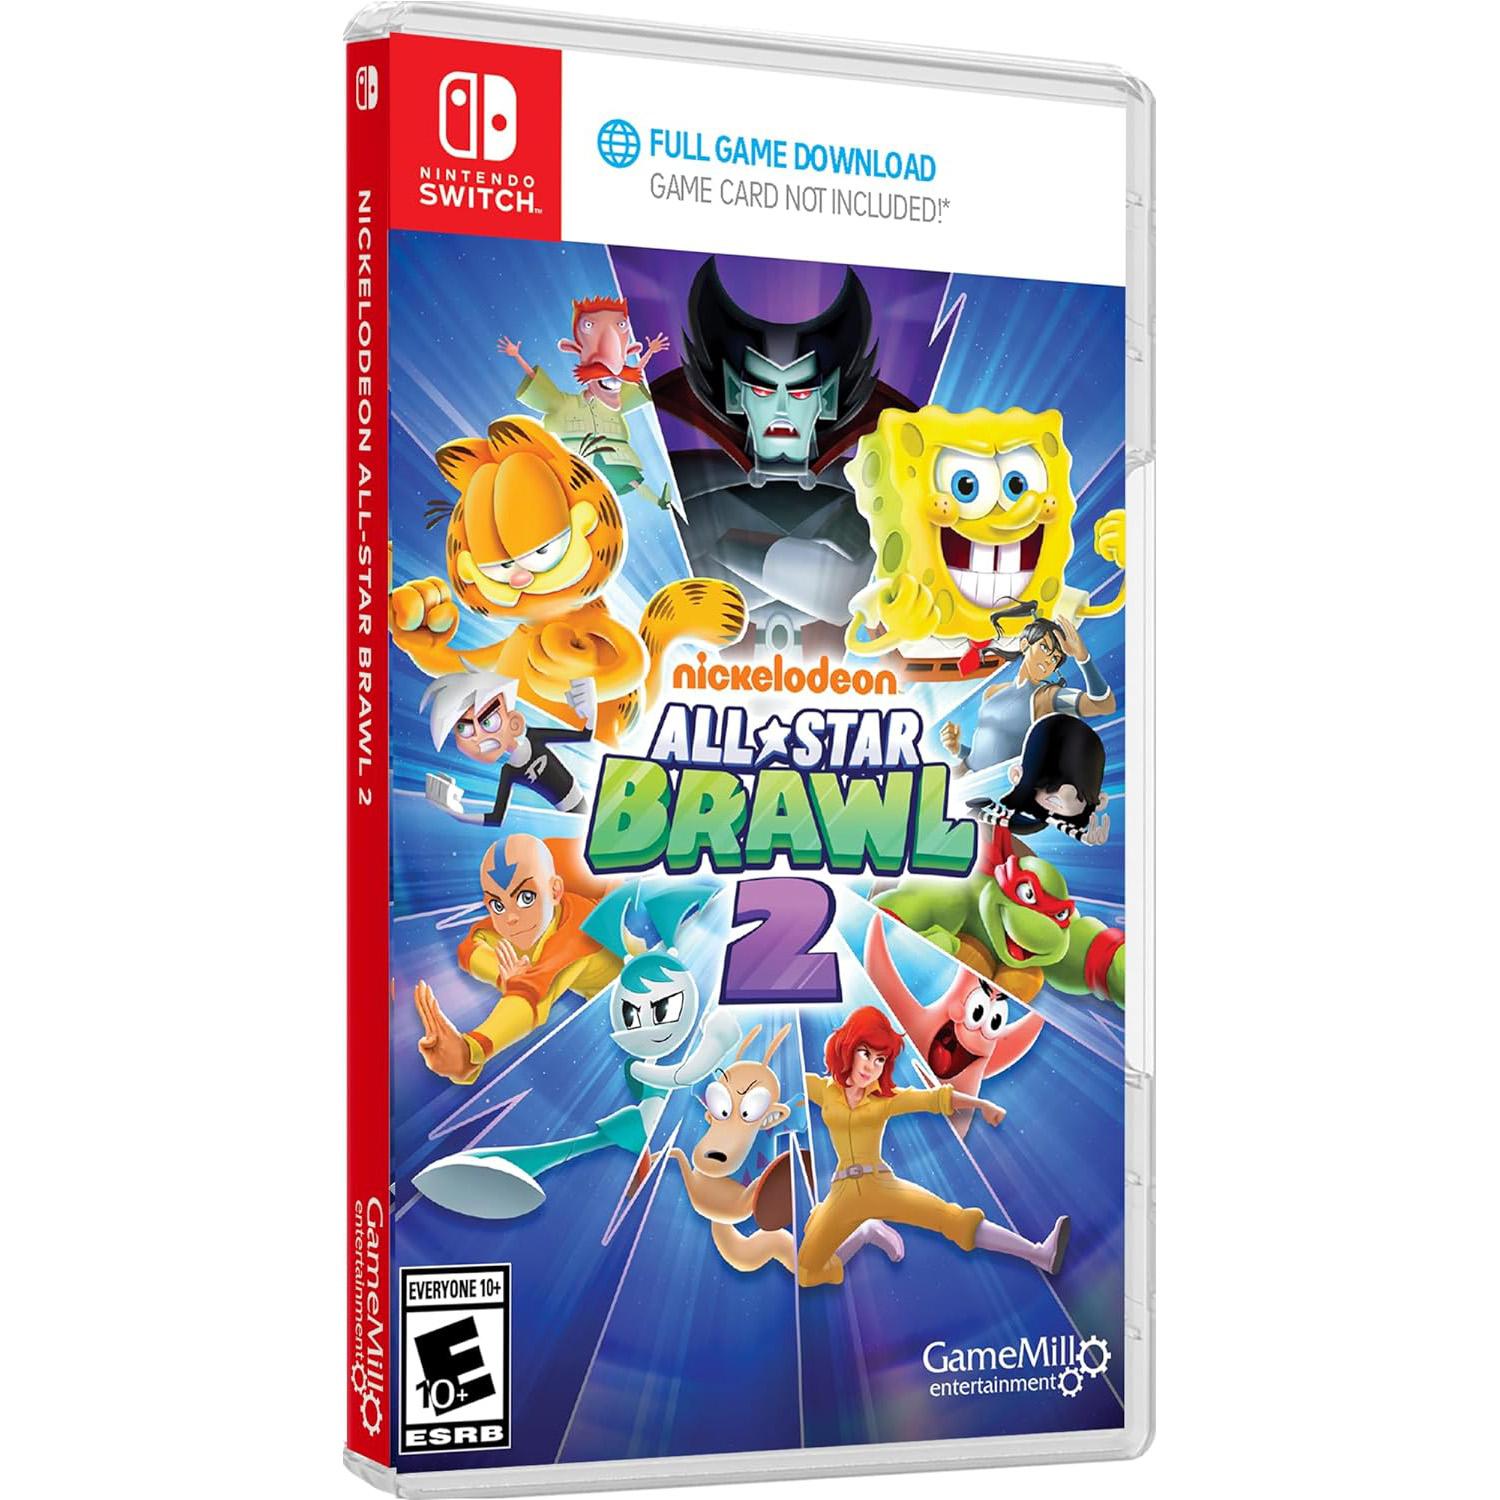 Nickelodeon All Star Brawl 2 PS5 or Switch for $24.99